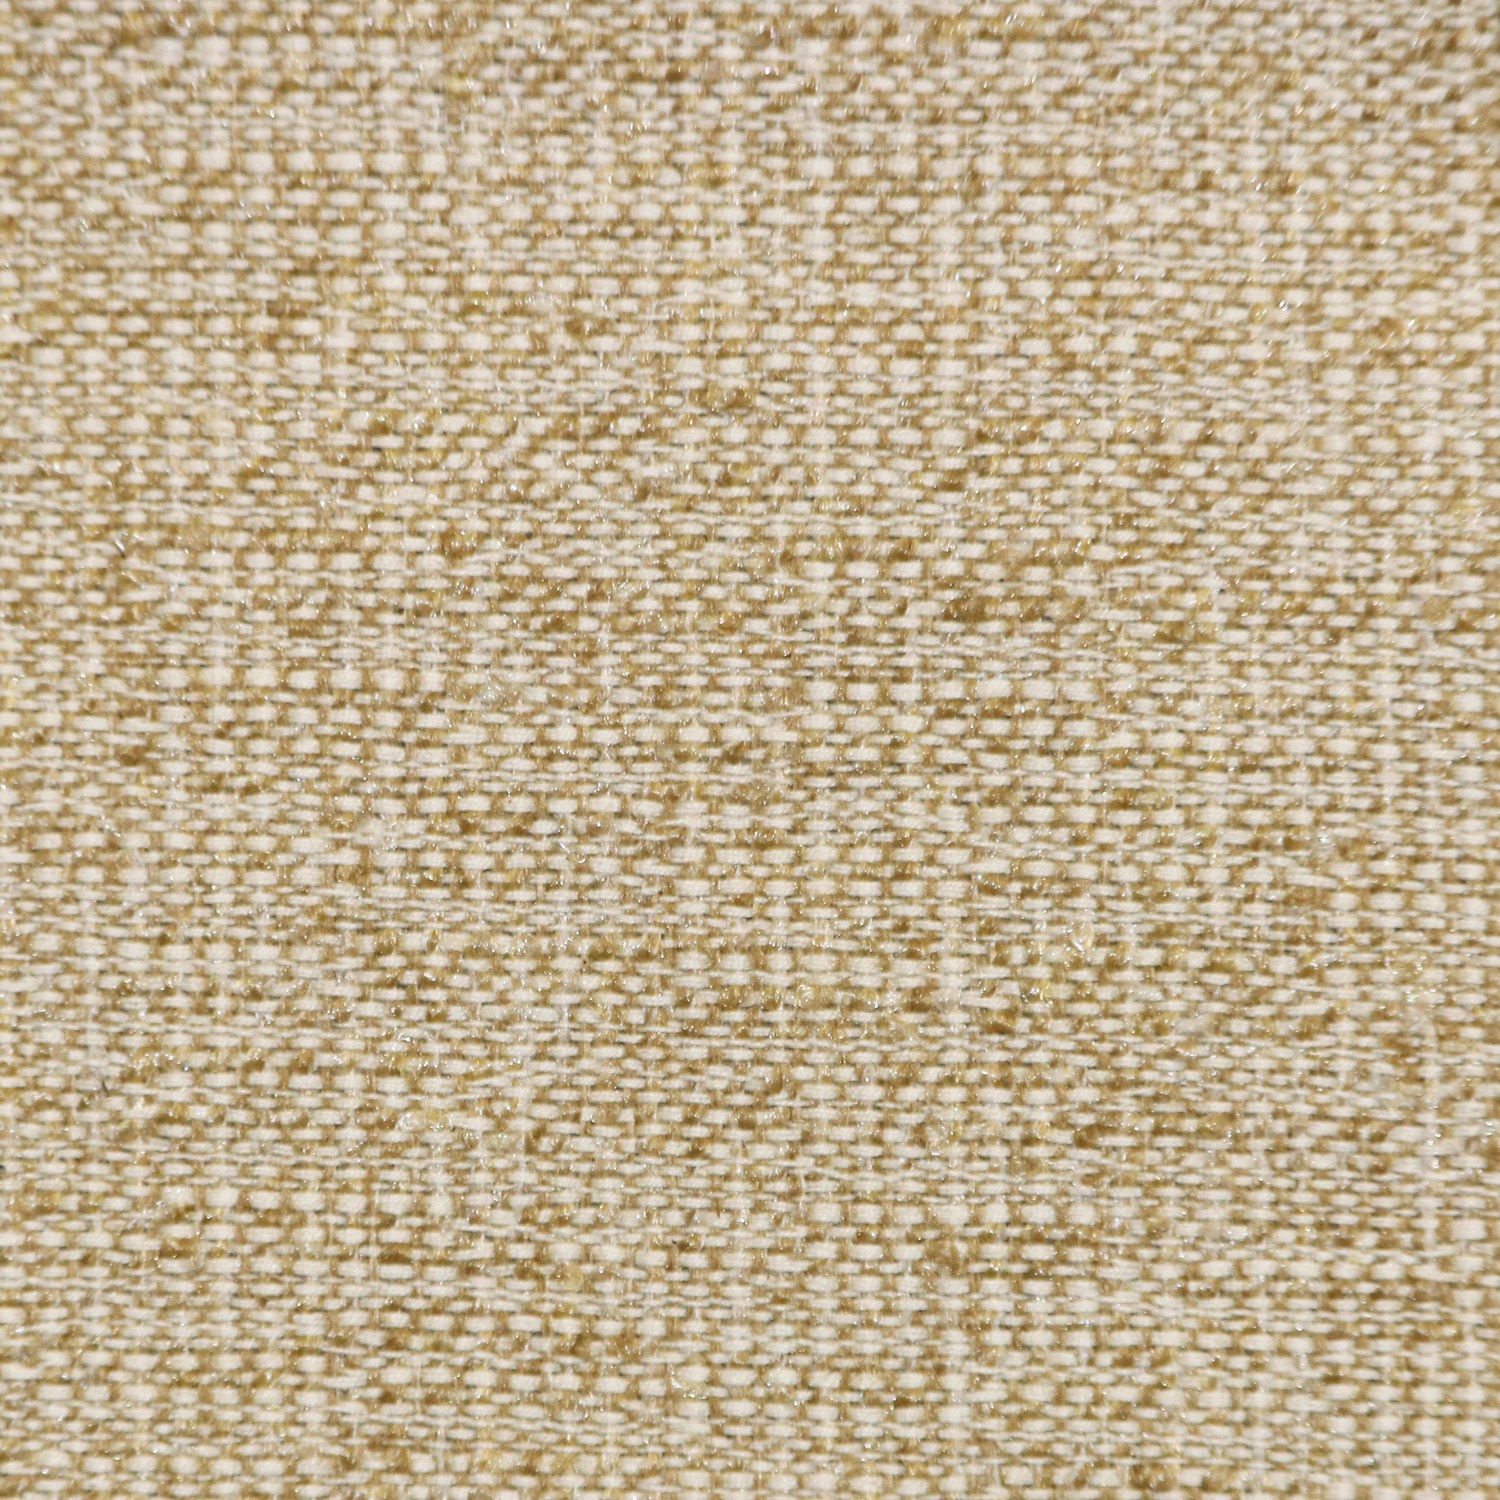 a close up of a beige fabric texture